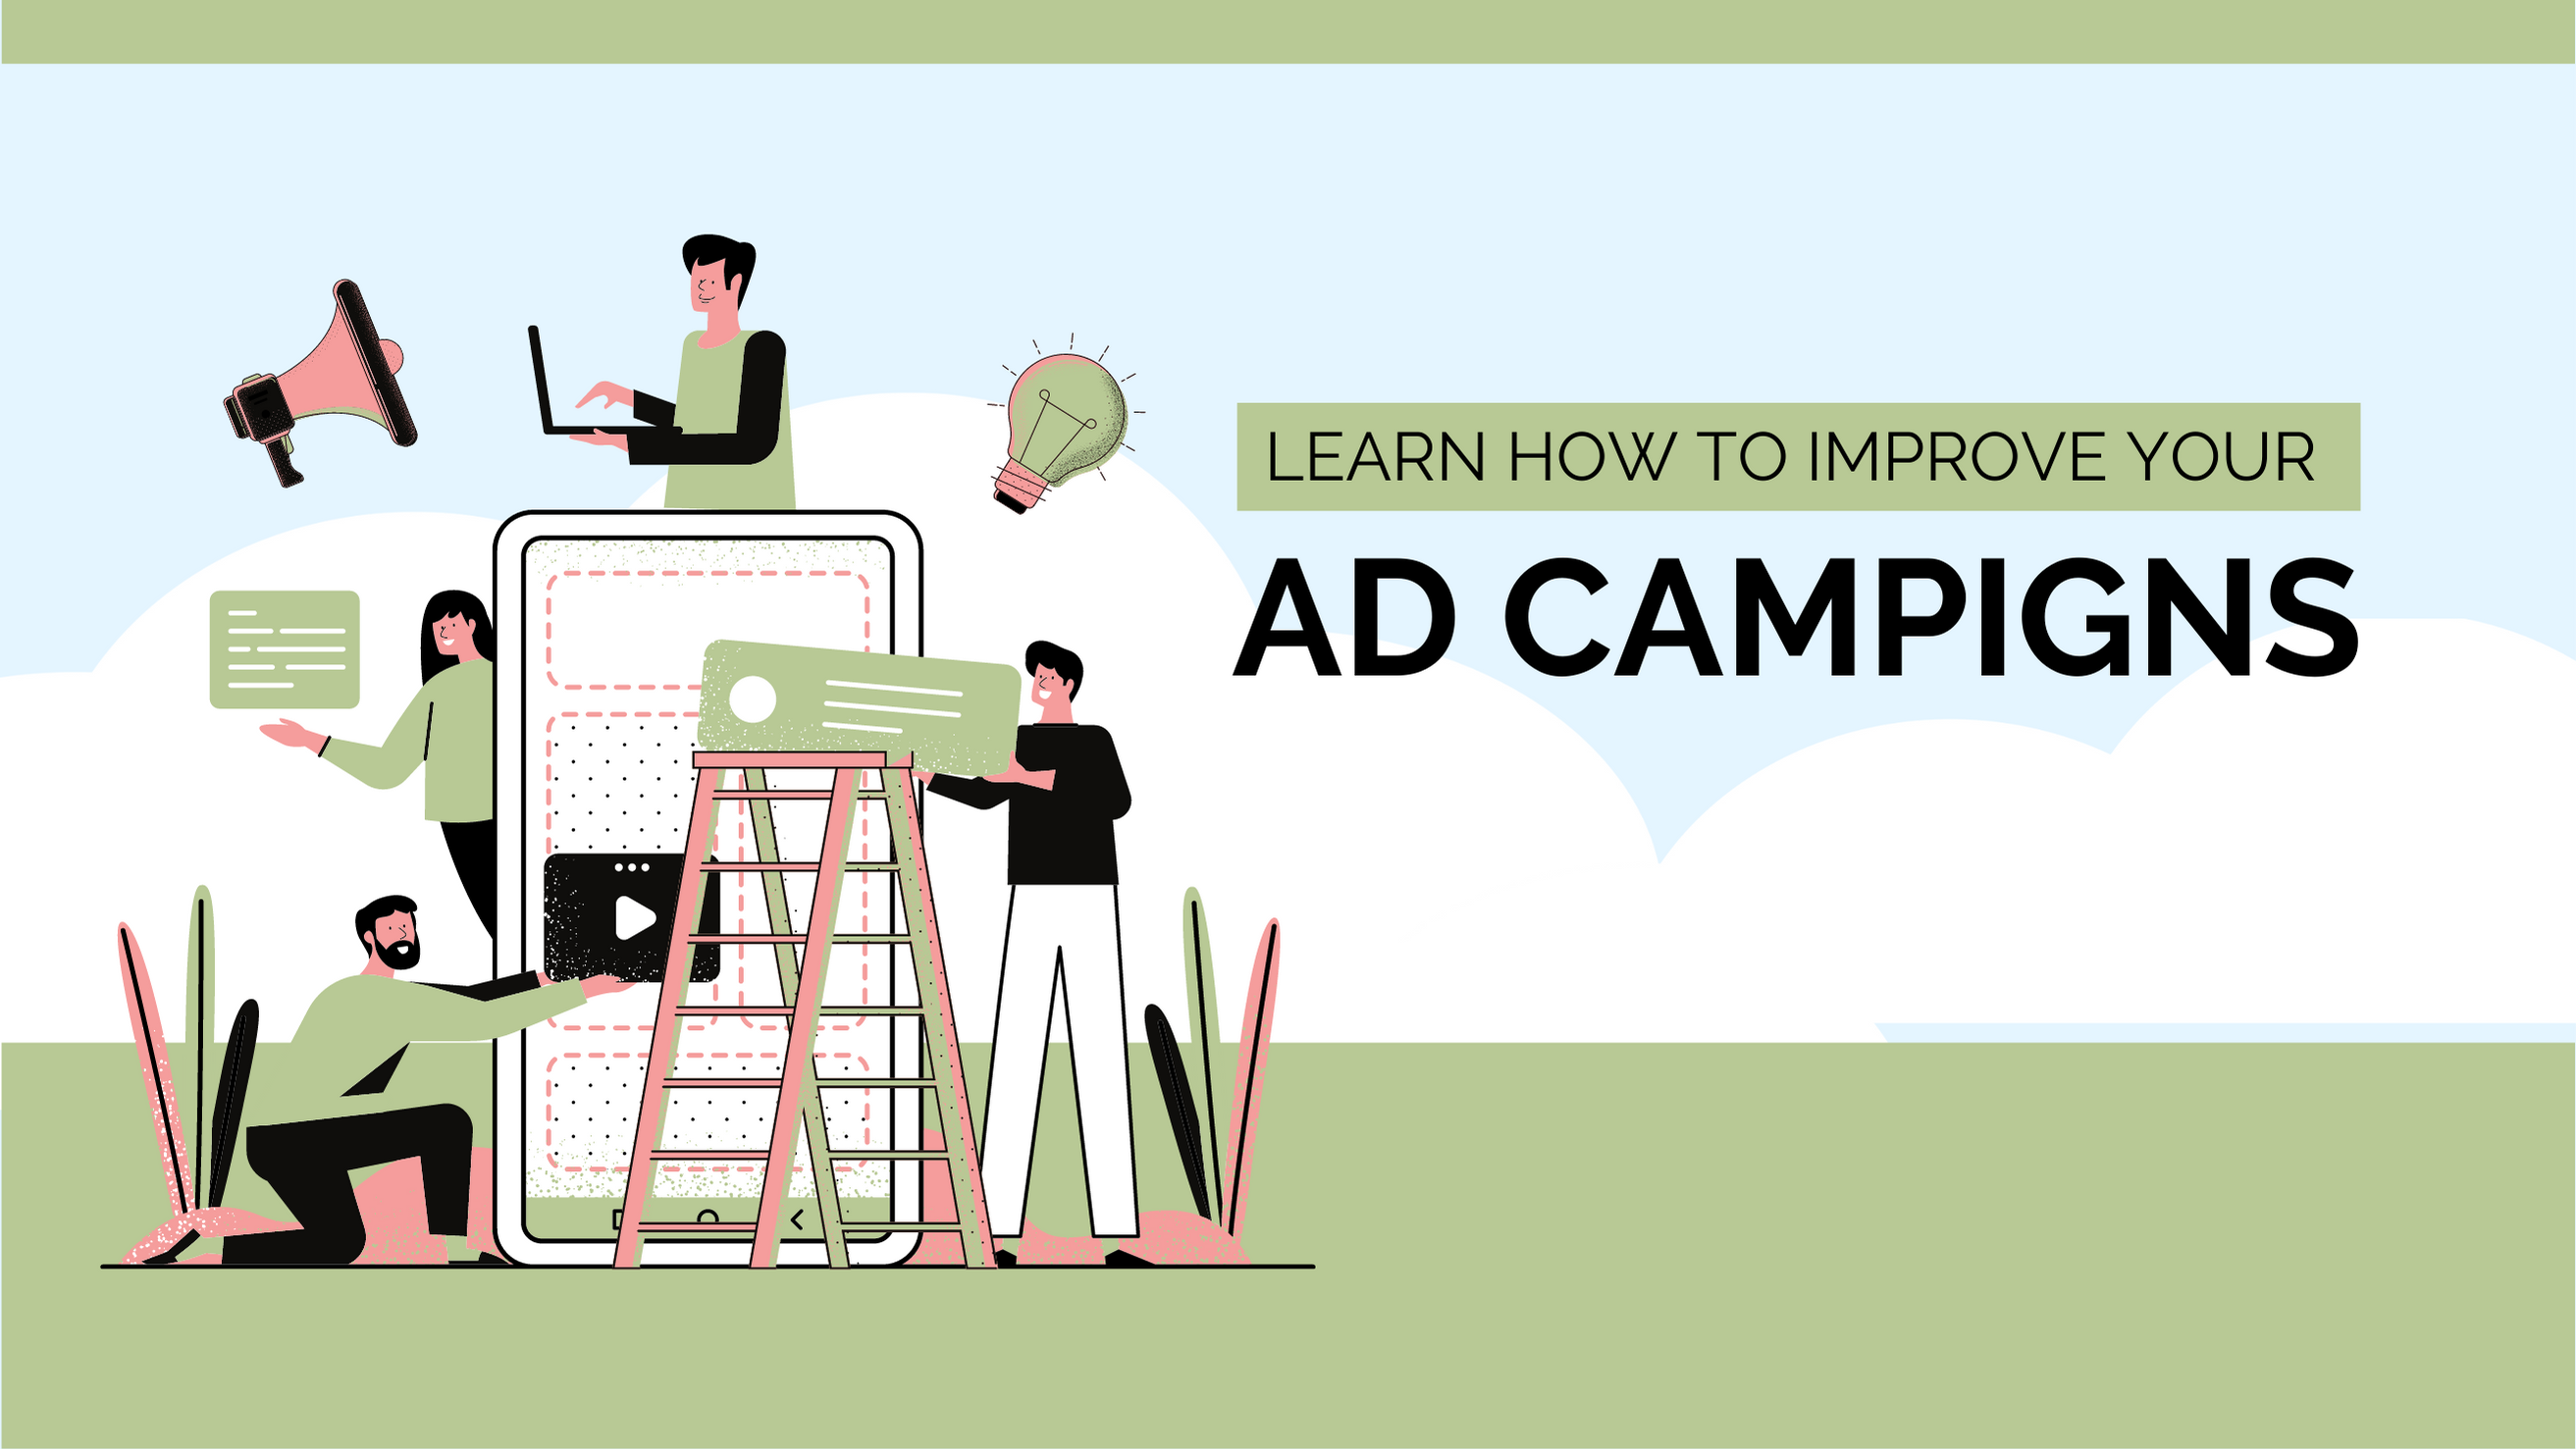 Learn how to improve ad campaigns